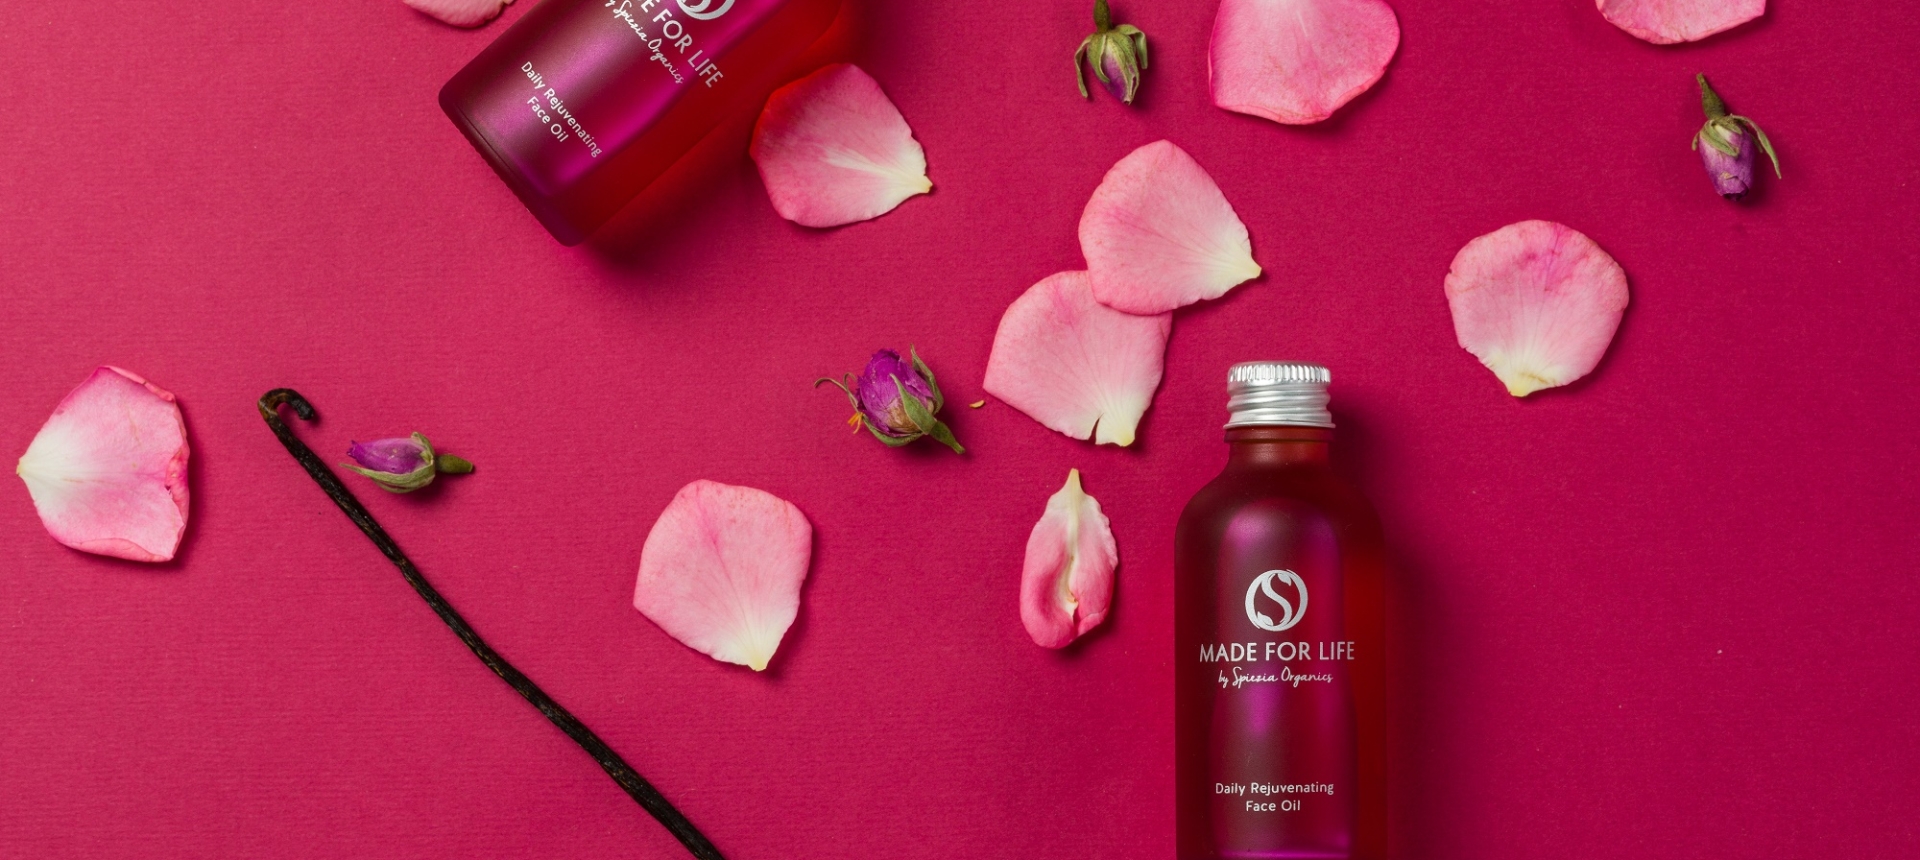 Made for Life products laying on a pink background surrounded by pink rose petals